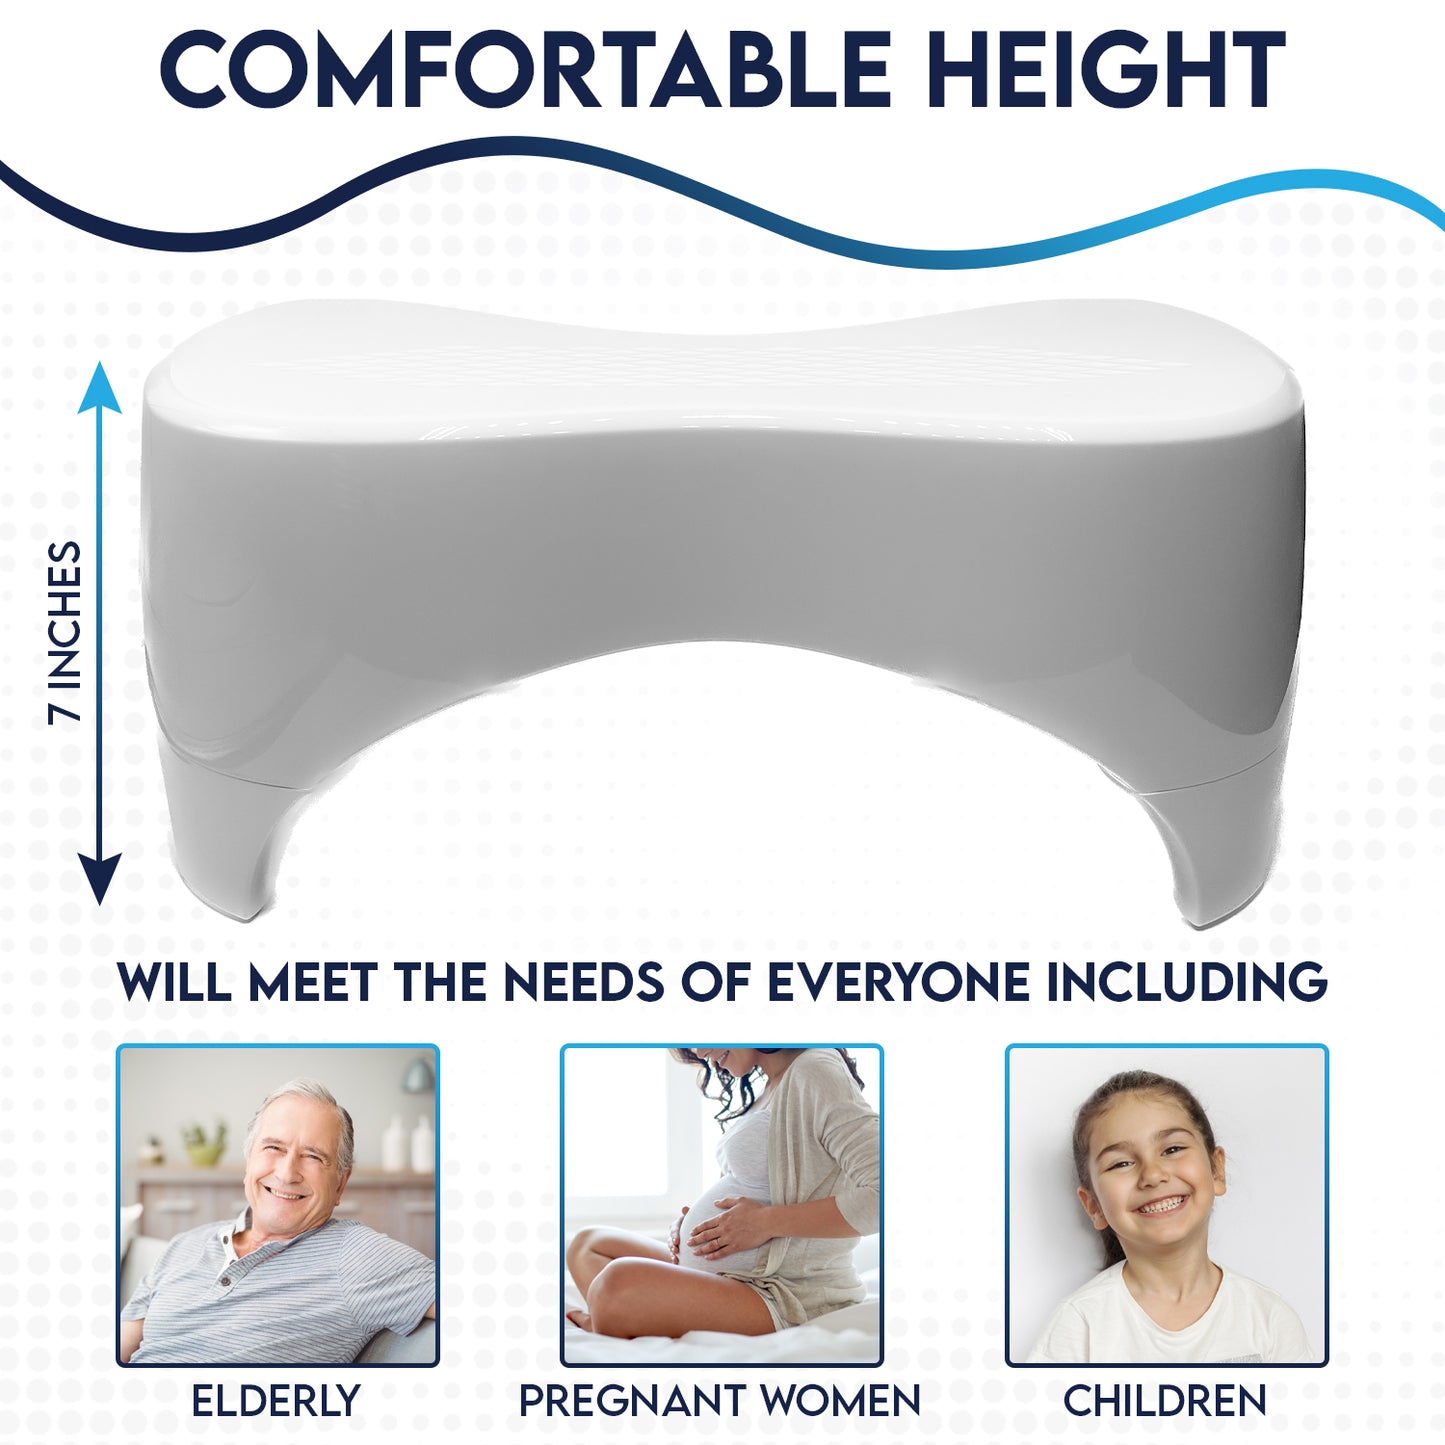 JEP 303- Toilet Stool & Potty Squatty Stool for Adults- Adjustable Poop Stool for Bathroom